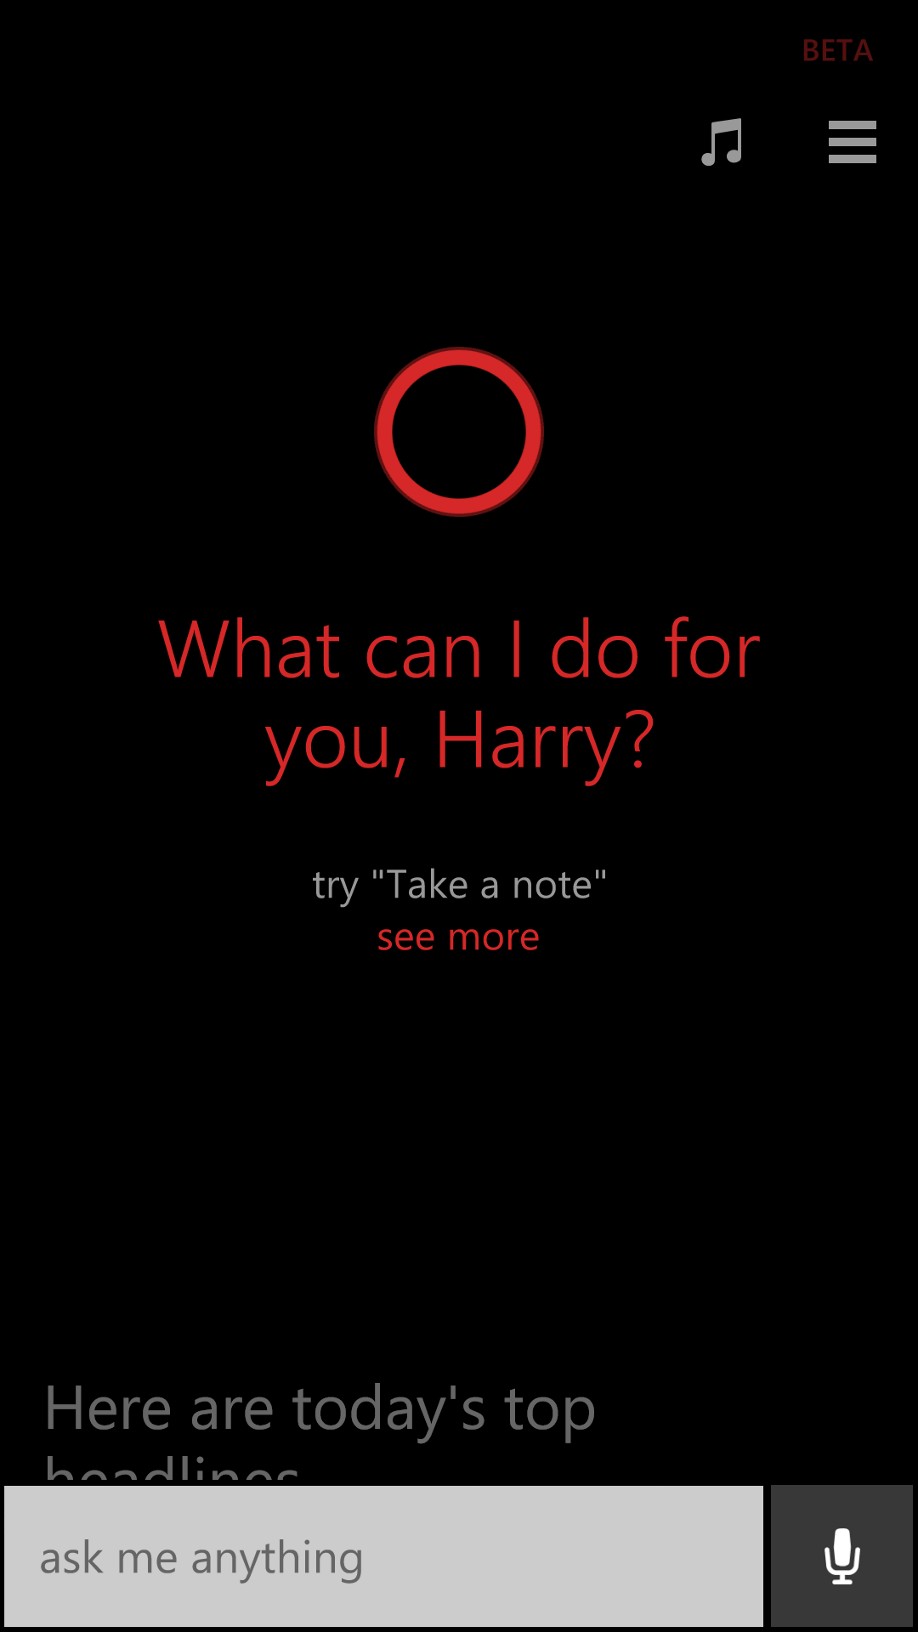 Cortana, Windows 8.1's voice-activated personal assistant (Microsoft)